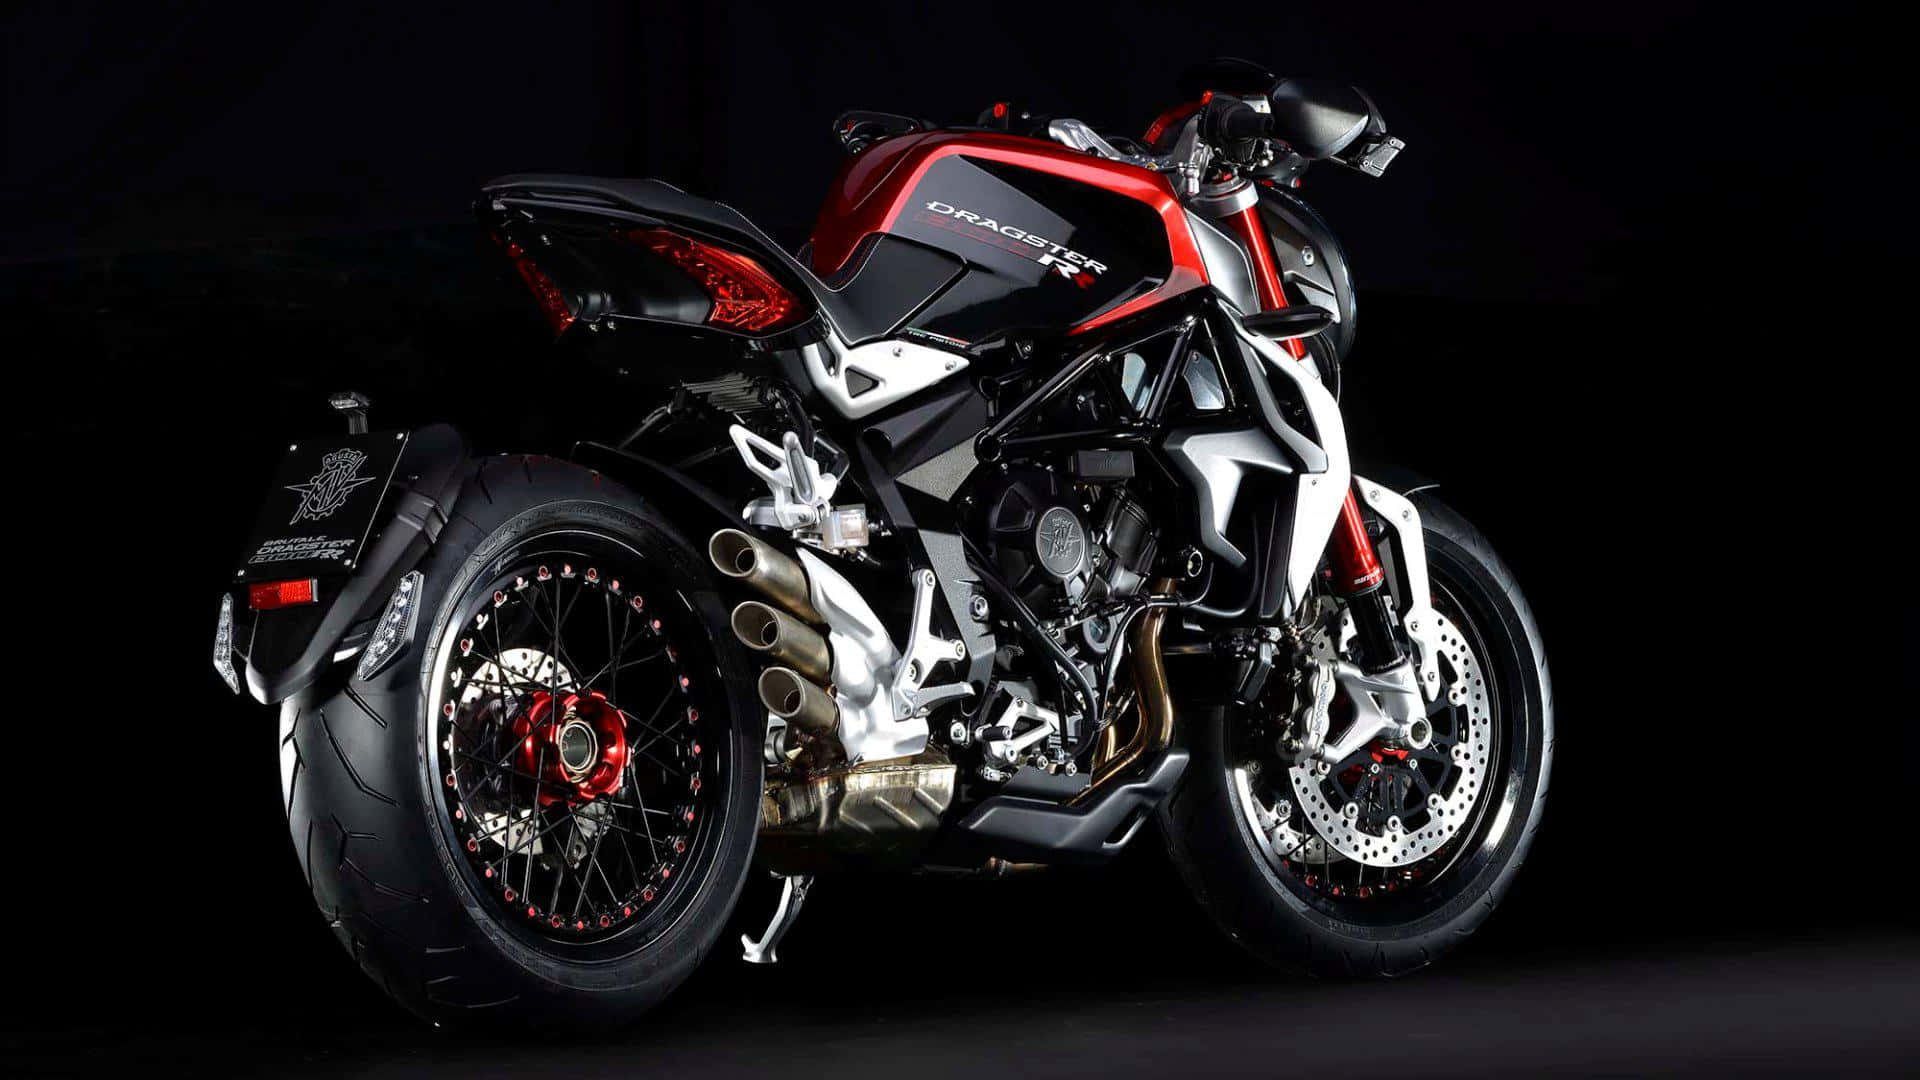 Spectacular Mv Agusta Motorcycle In Motion Wallpaper